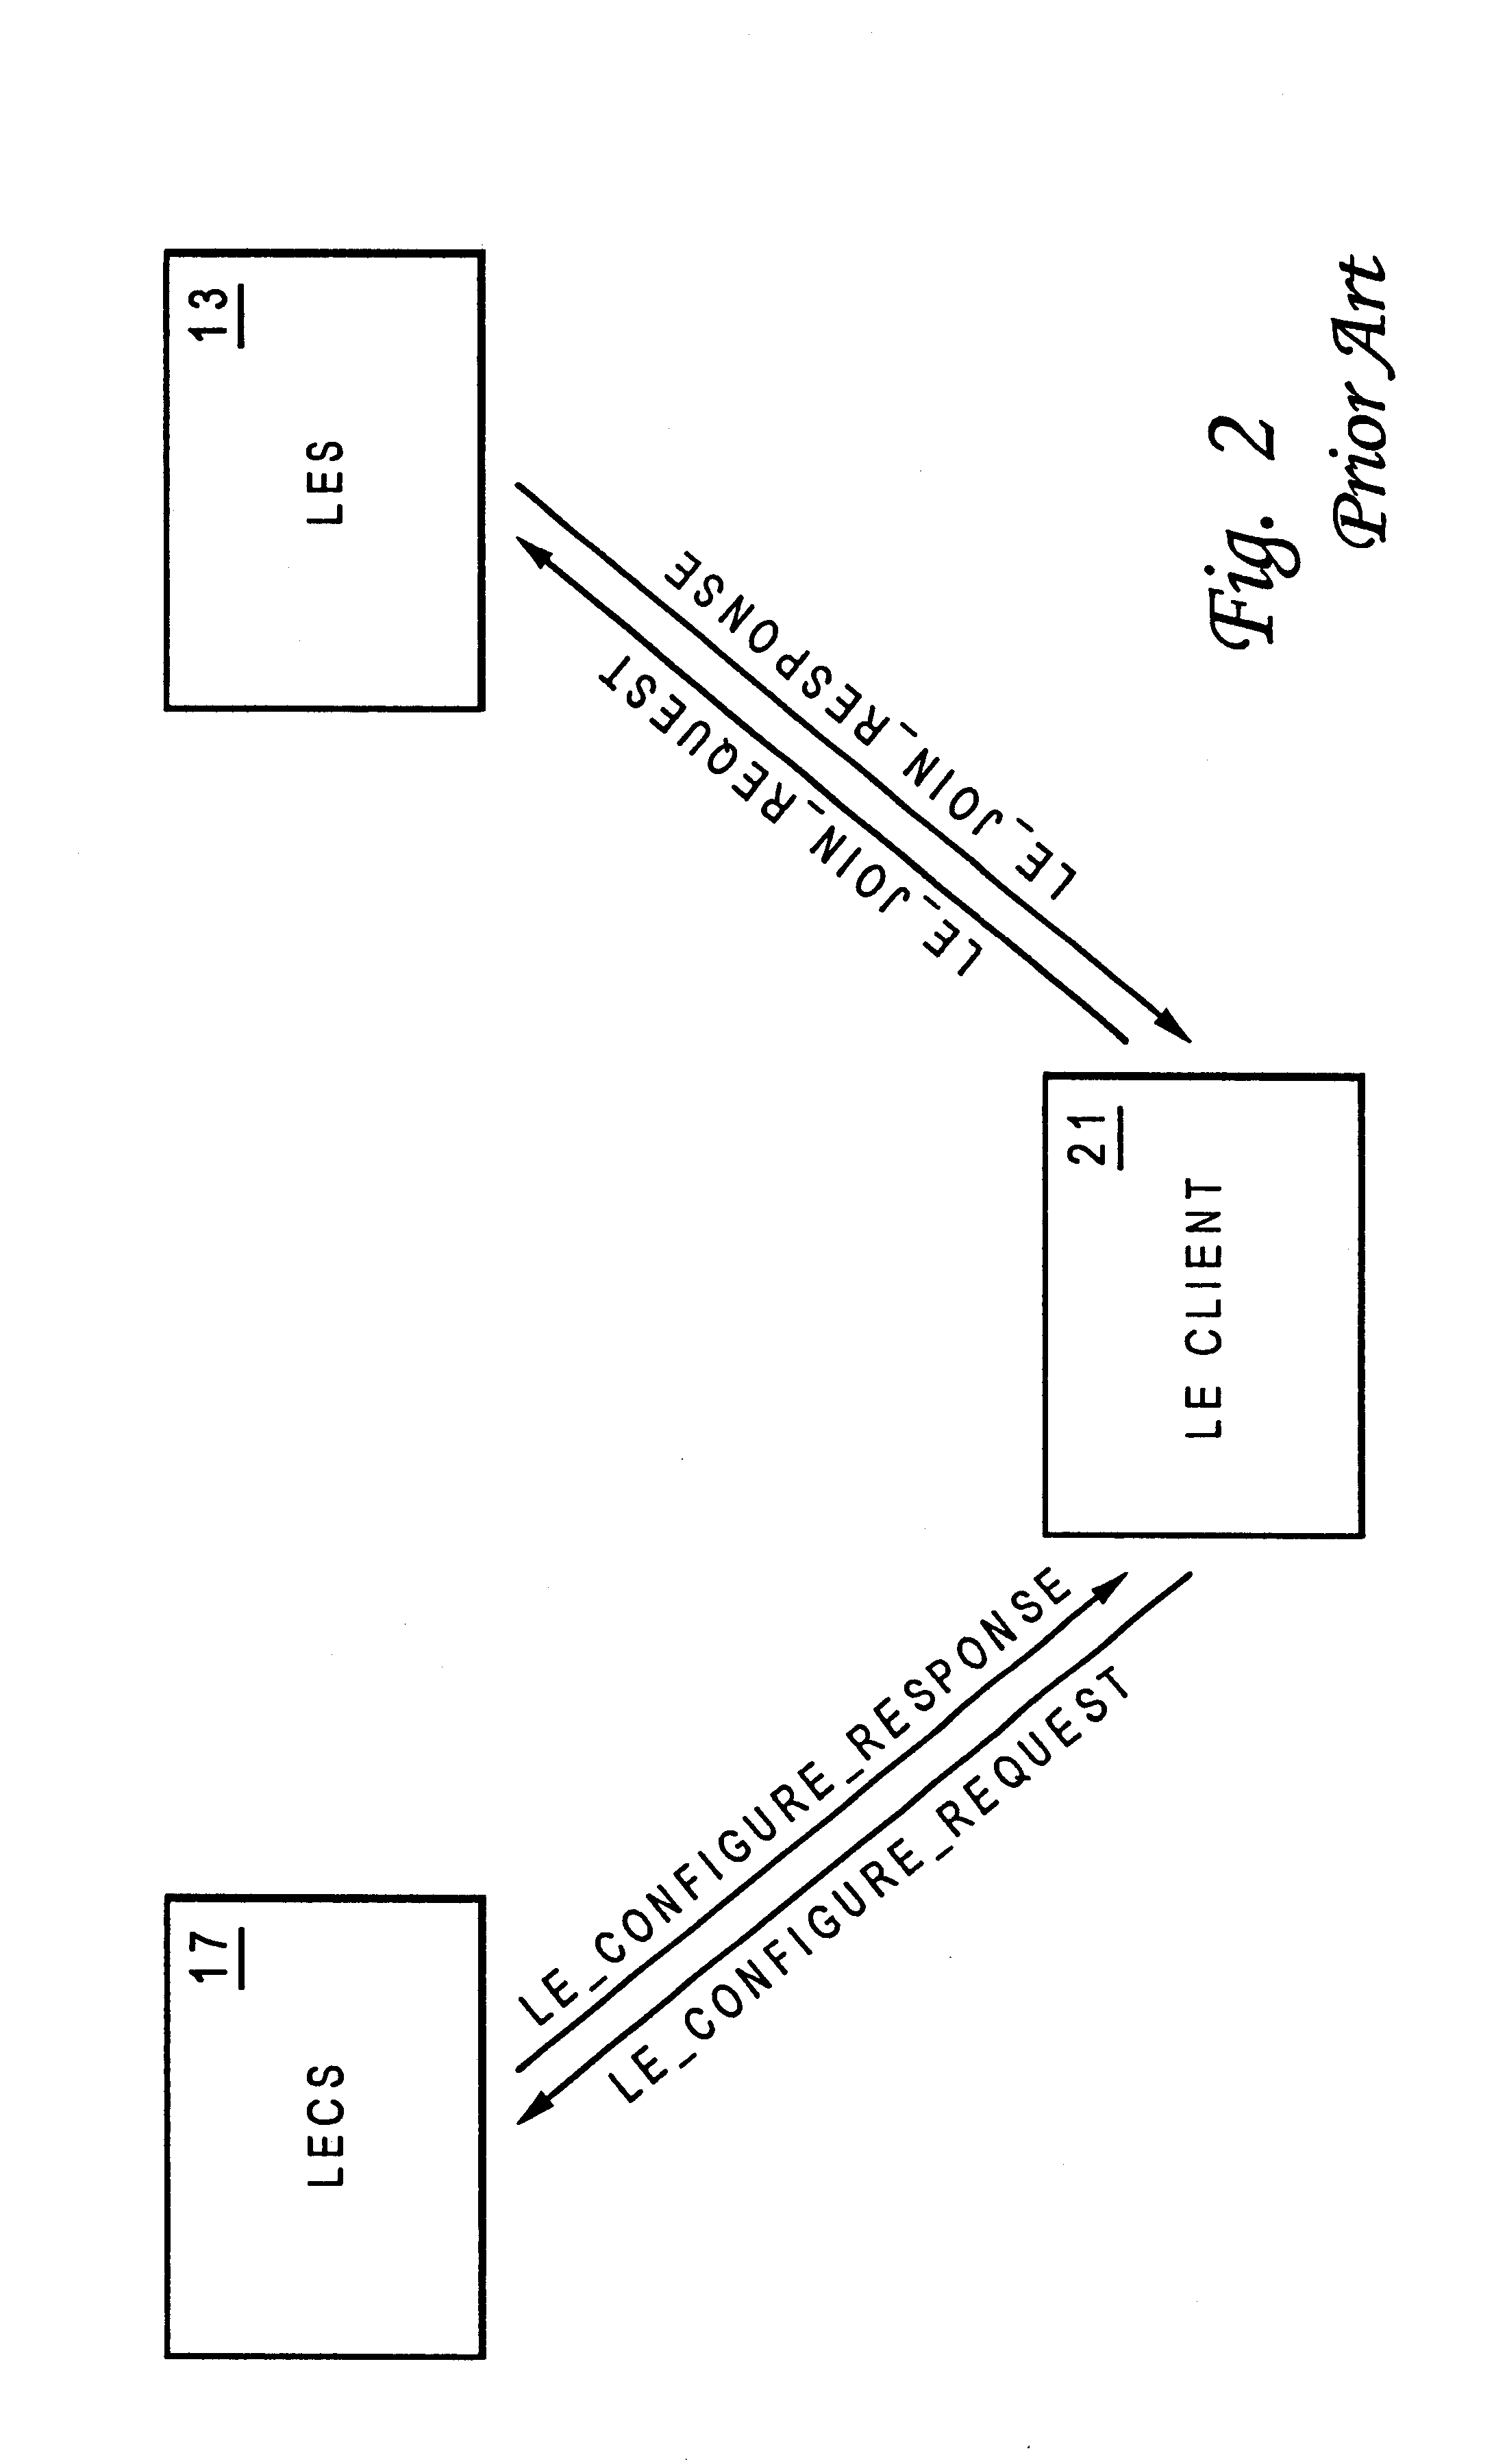 Method and system for providing security to asynchronous transfer mode emulated local-area networks